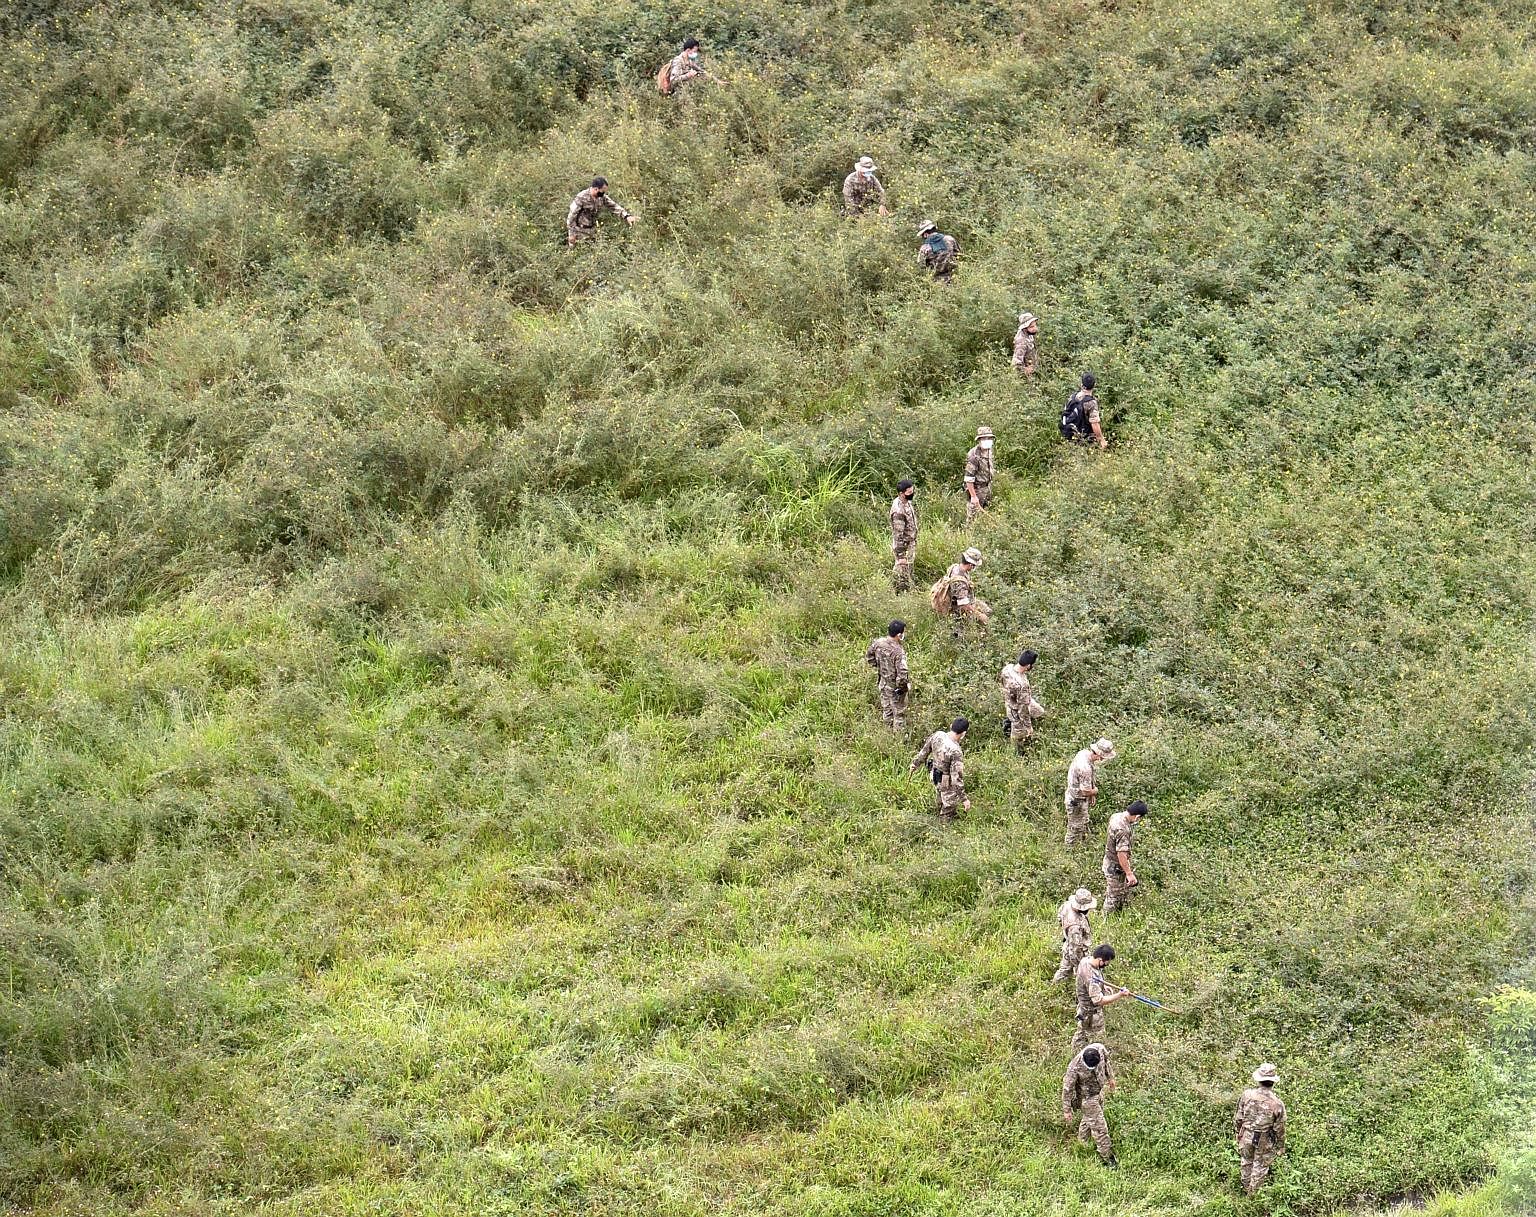 Officers from the police's Gurkha Contingent searching the undeveloped plot of land in Punggol Field, where a 38-year-old man was stabbed on Sunday night. The man later died from his injuries at Sengkang General Hospital. The case has been classified